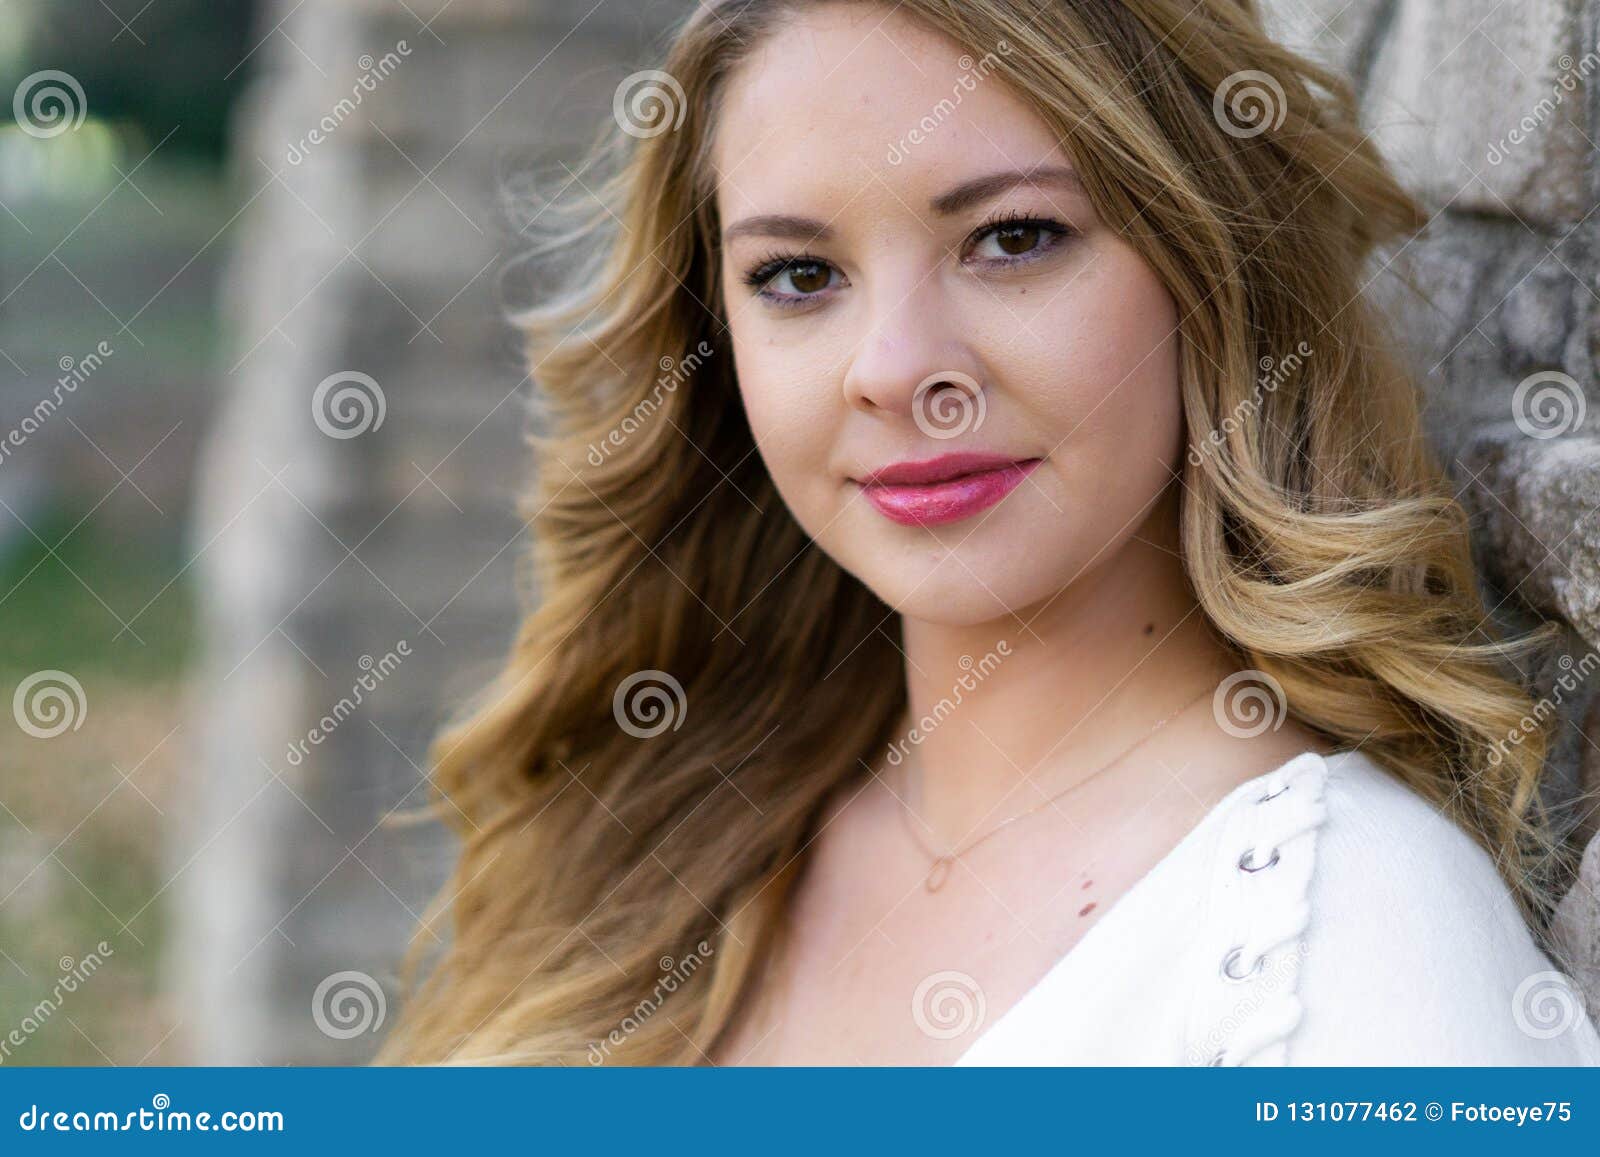 Pretty Girl White Latino With Long Blonde Hair Stock Photo - Image of curls...